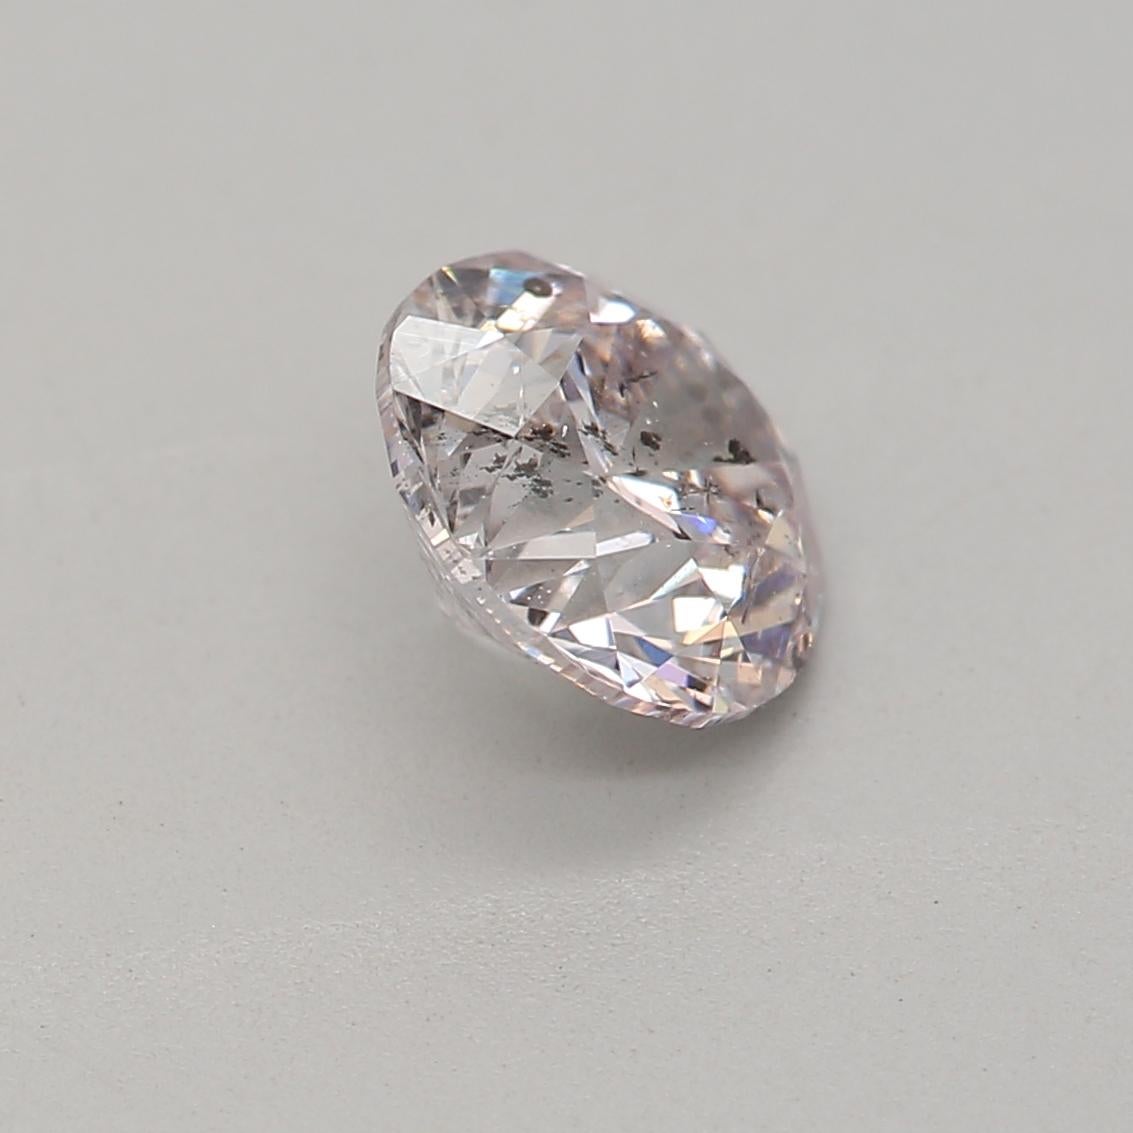 Women's or Men's 0.70 Carat Very Light Pink Round cut diamond I1 Clarity GIA Certified For Sale